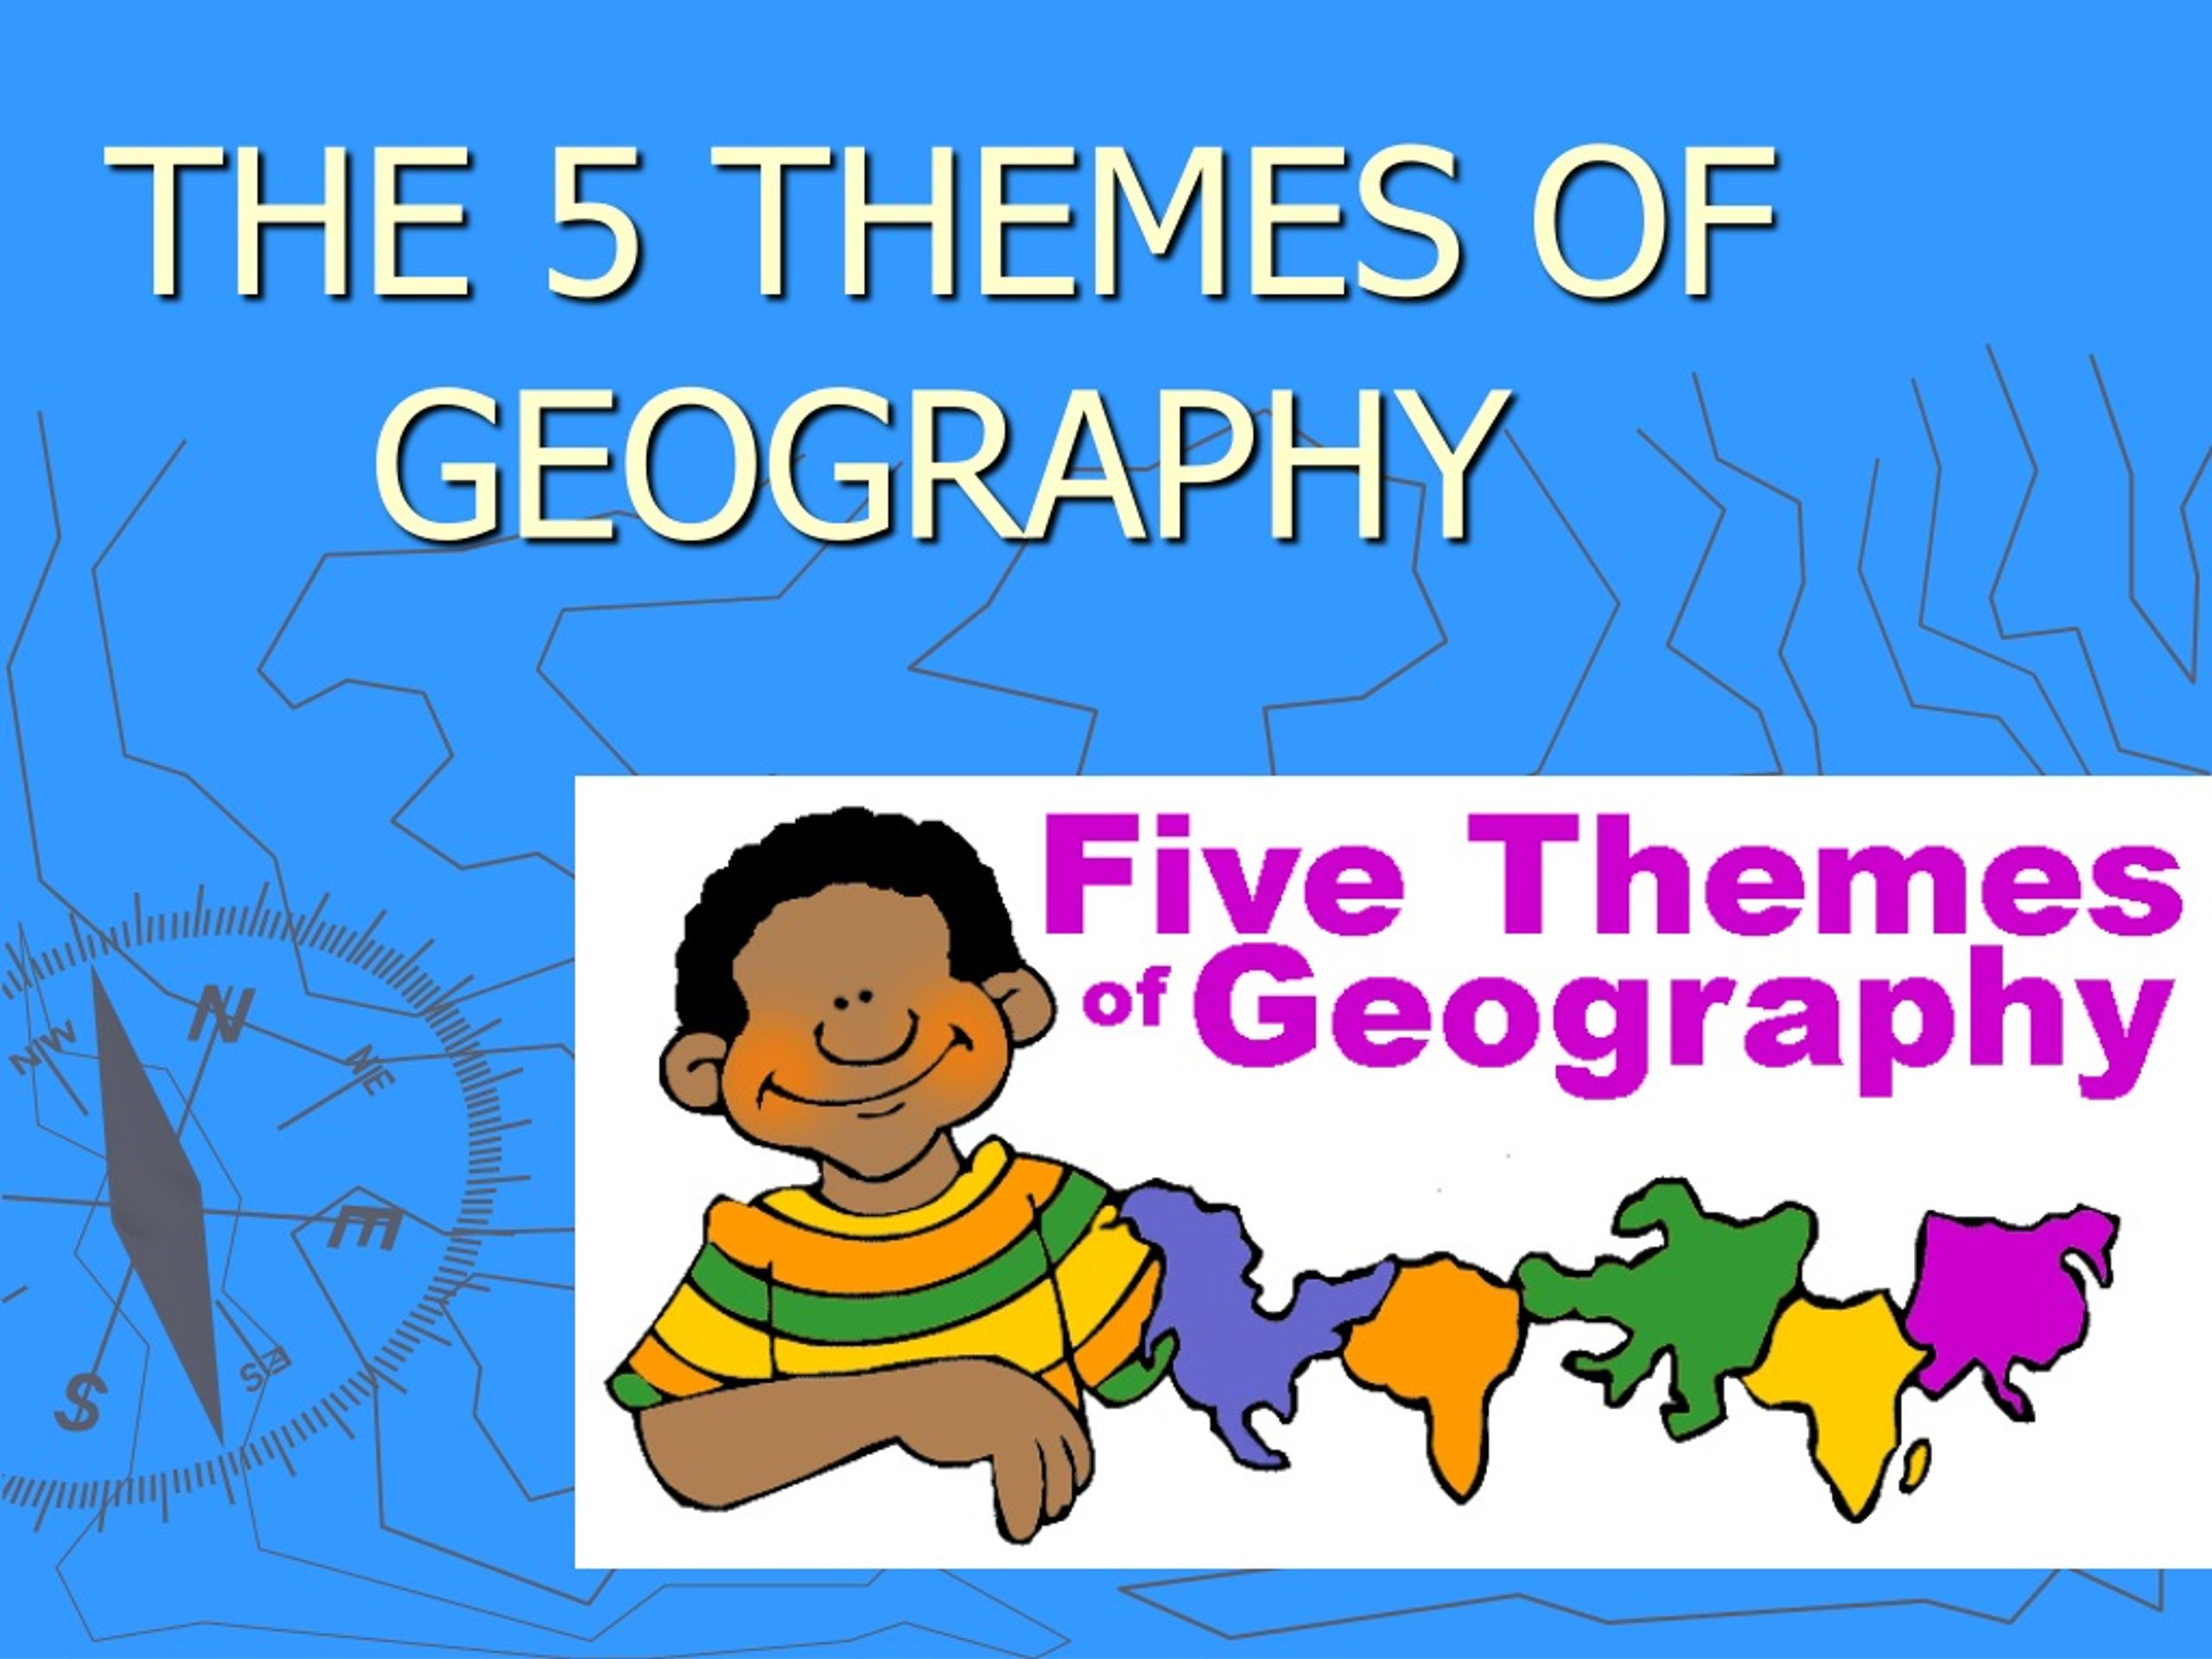 what are the 5 themes of geography presentation